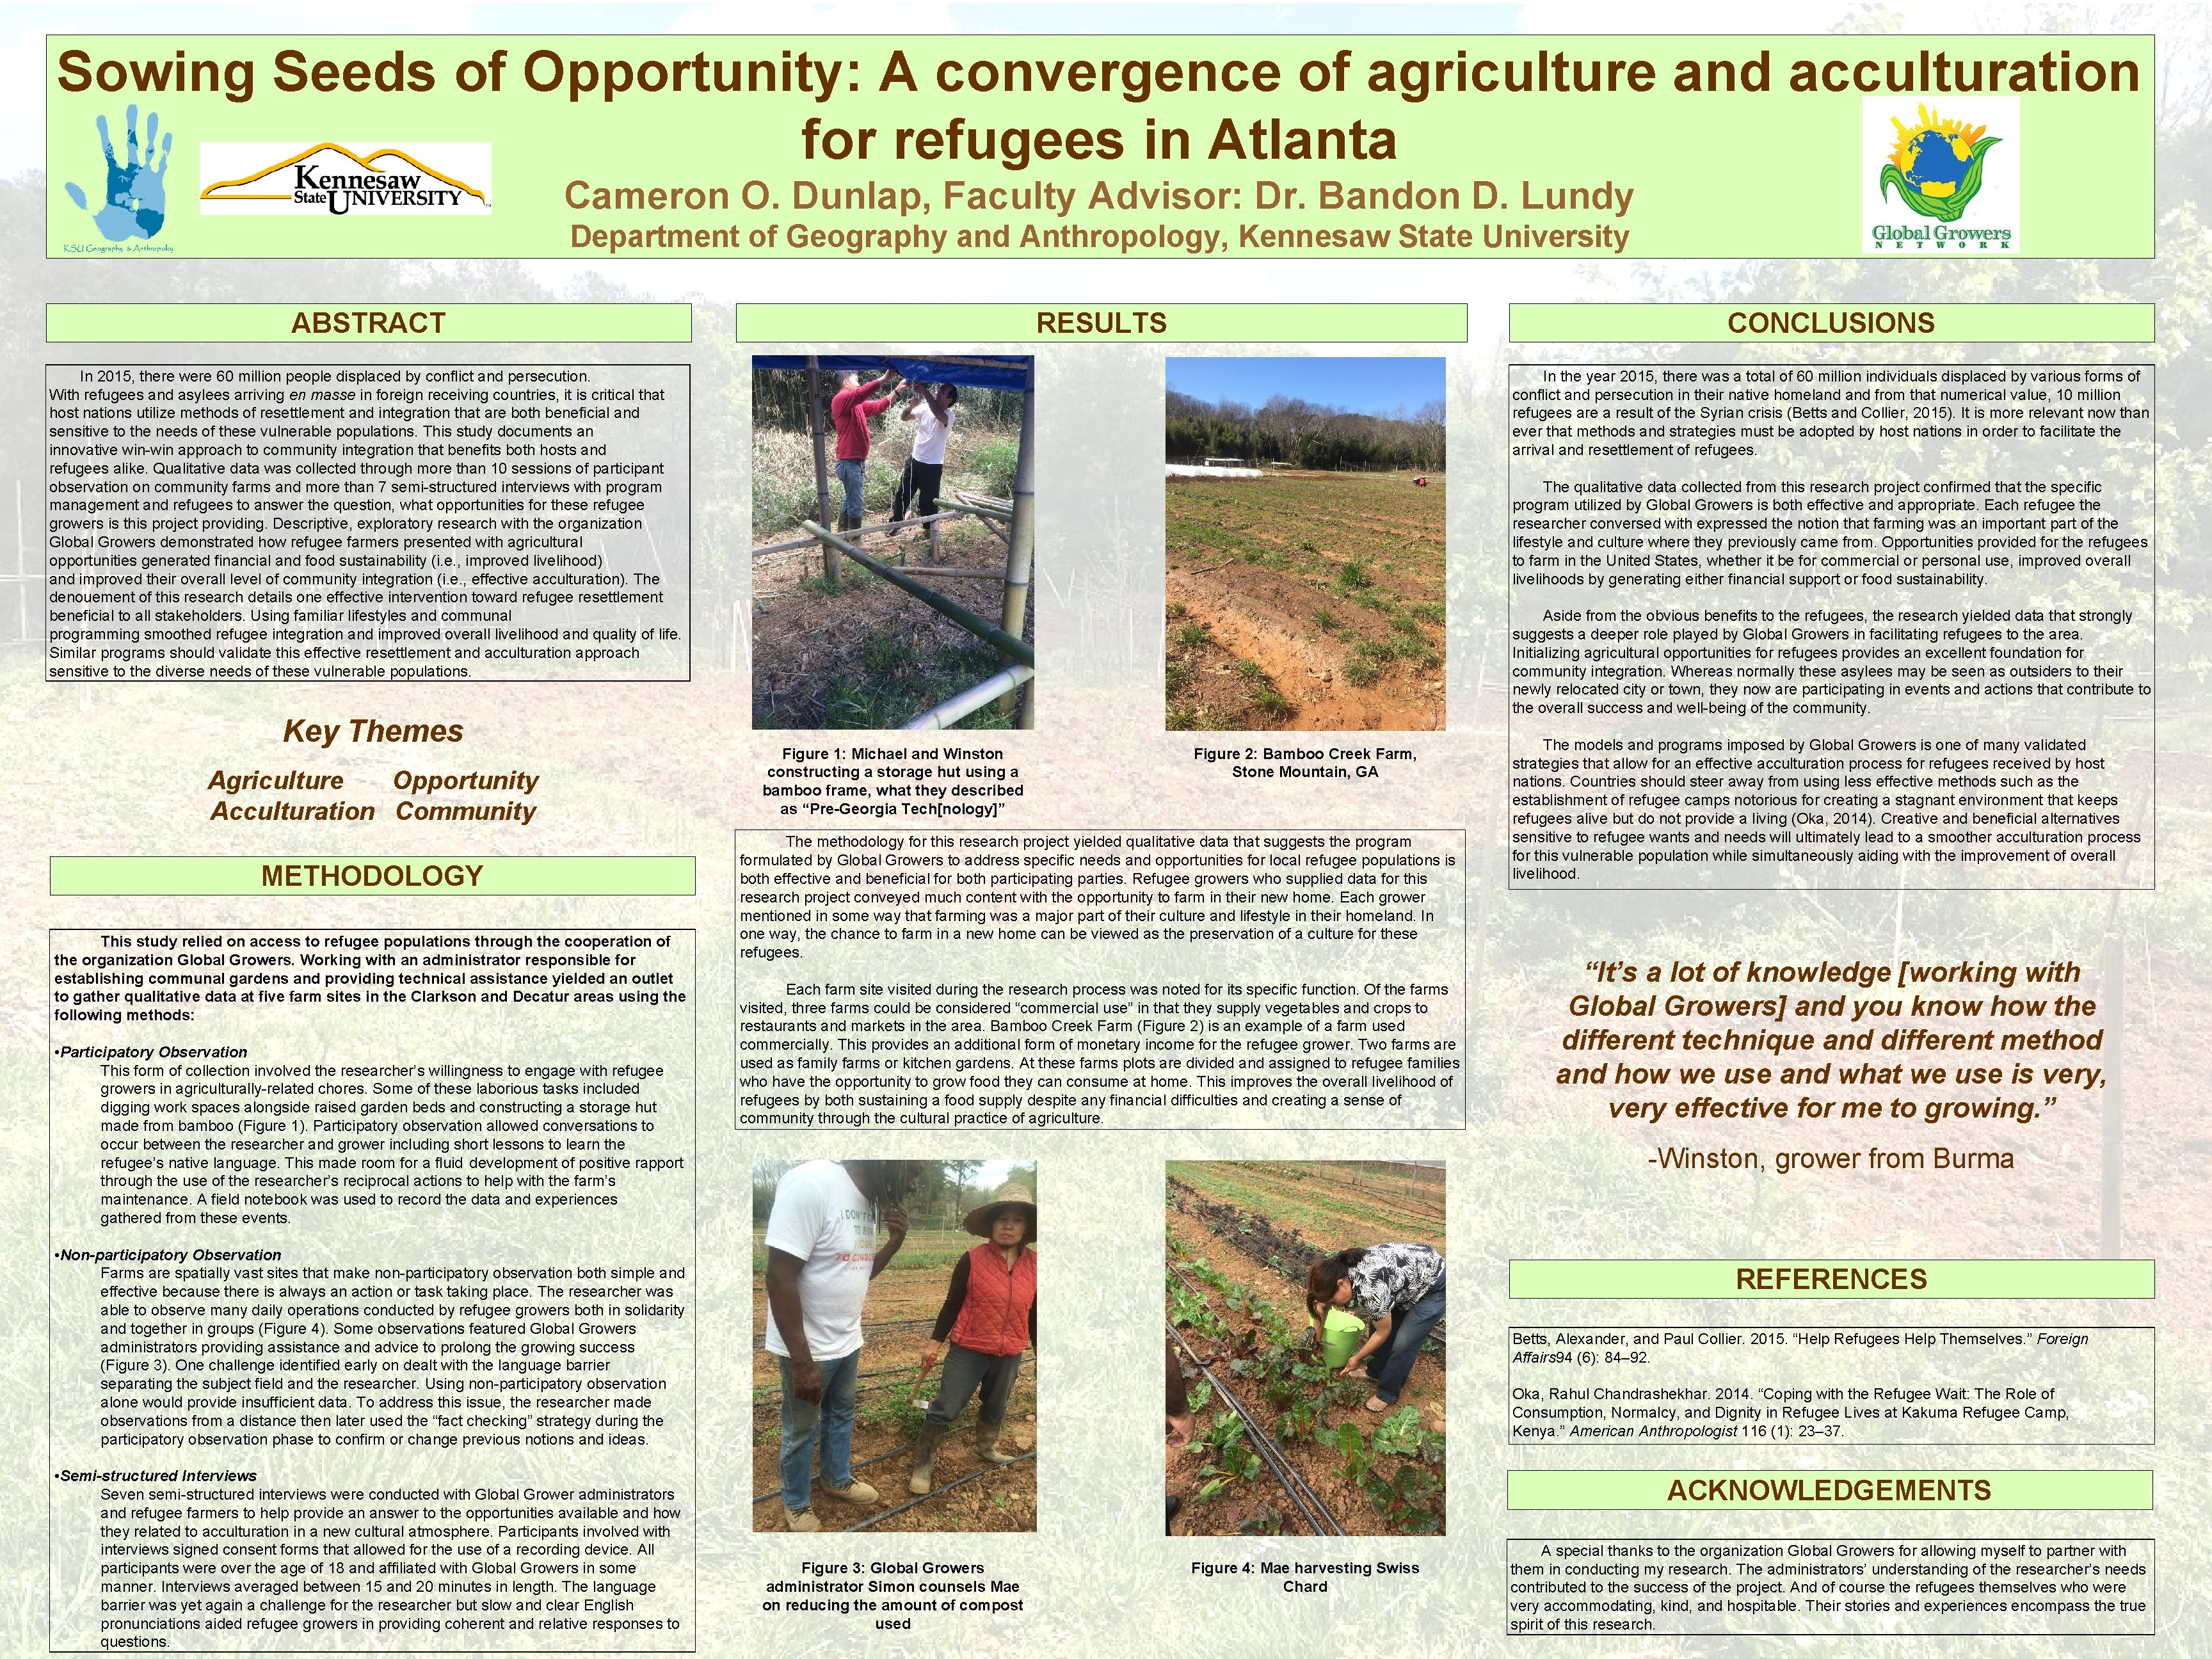 Sowing Seeds of Opportunity: A convergence of agriculture and acculturation for refugees in Atlanta